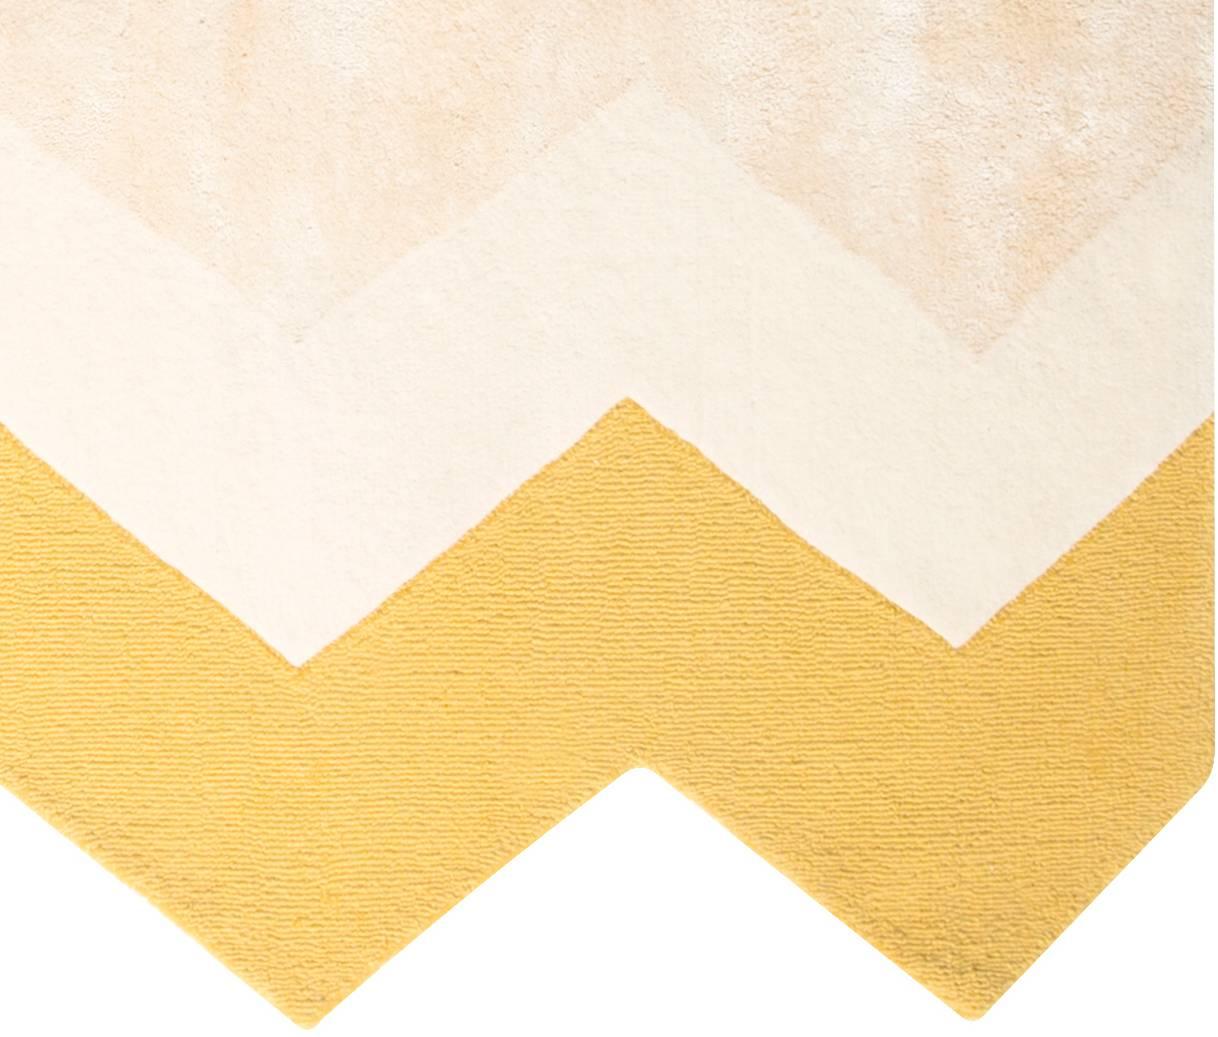 The Zuko rug features a fun chevron edge and matching print, in a soft, neutral color palette. Not another neutral to help ground a room. Rugs that make the room. Hand tufted rug made of a wool/viscose blend. Designed by Pieces.

Custom sizes are